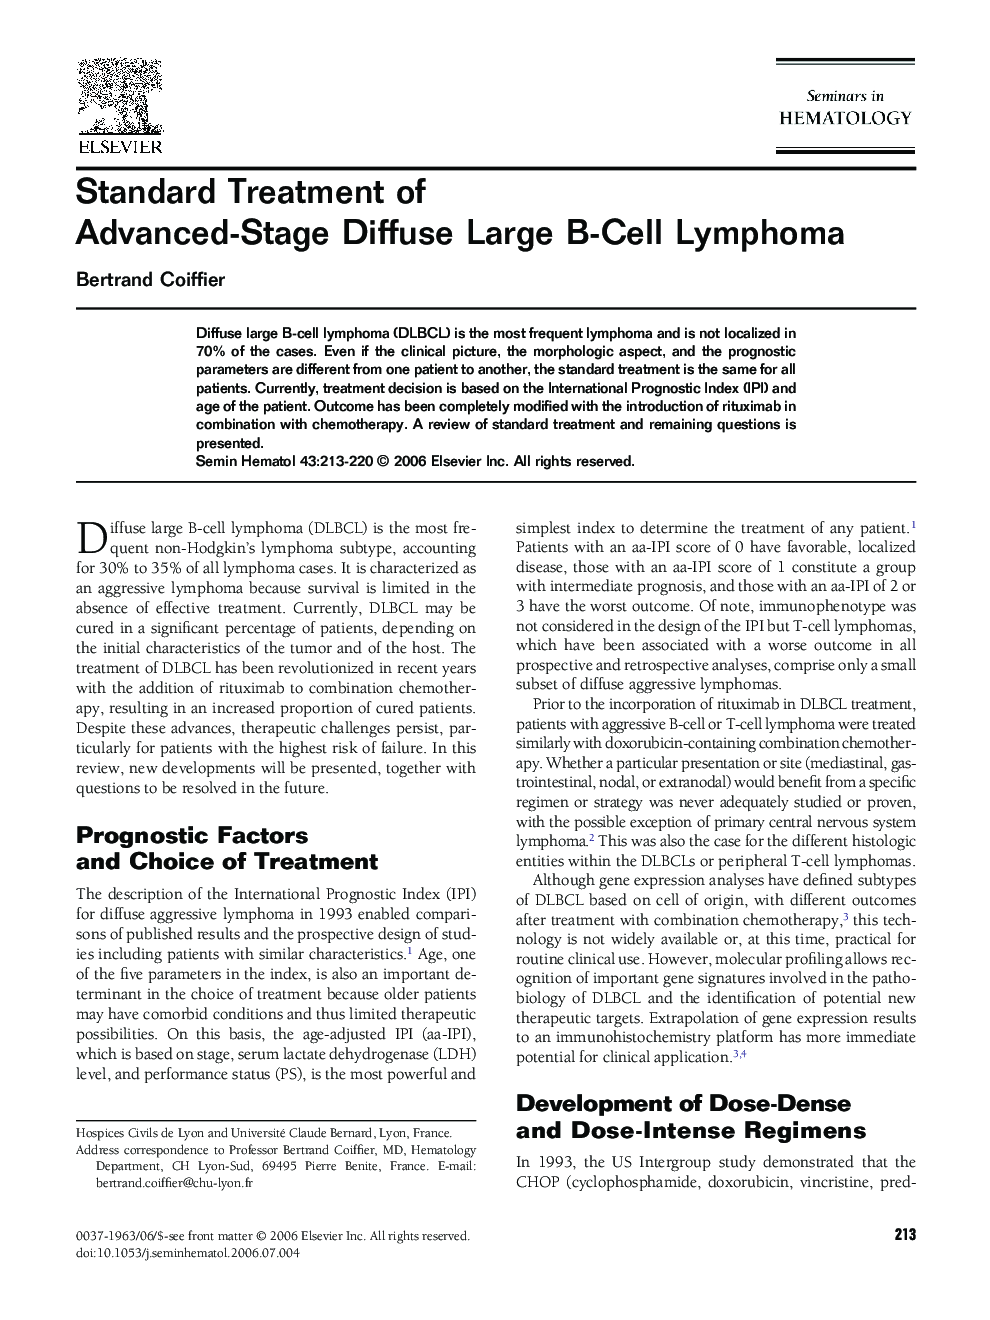 Standard Treatment of Advanced-Stage Diffuse Large B-Cell Lymphoma